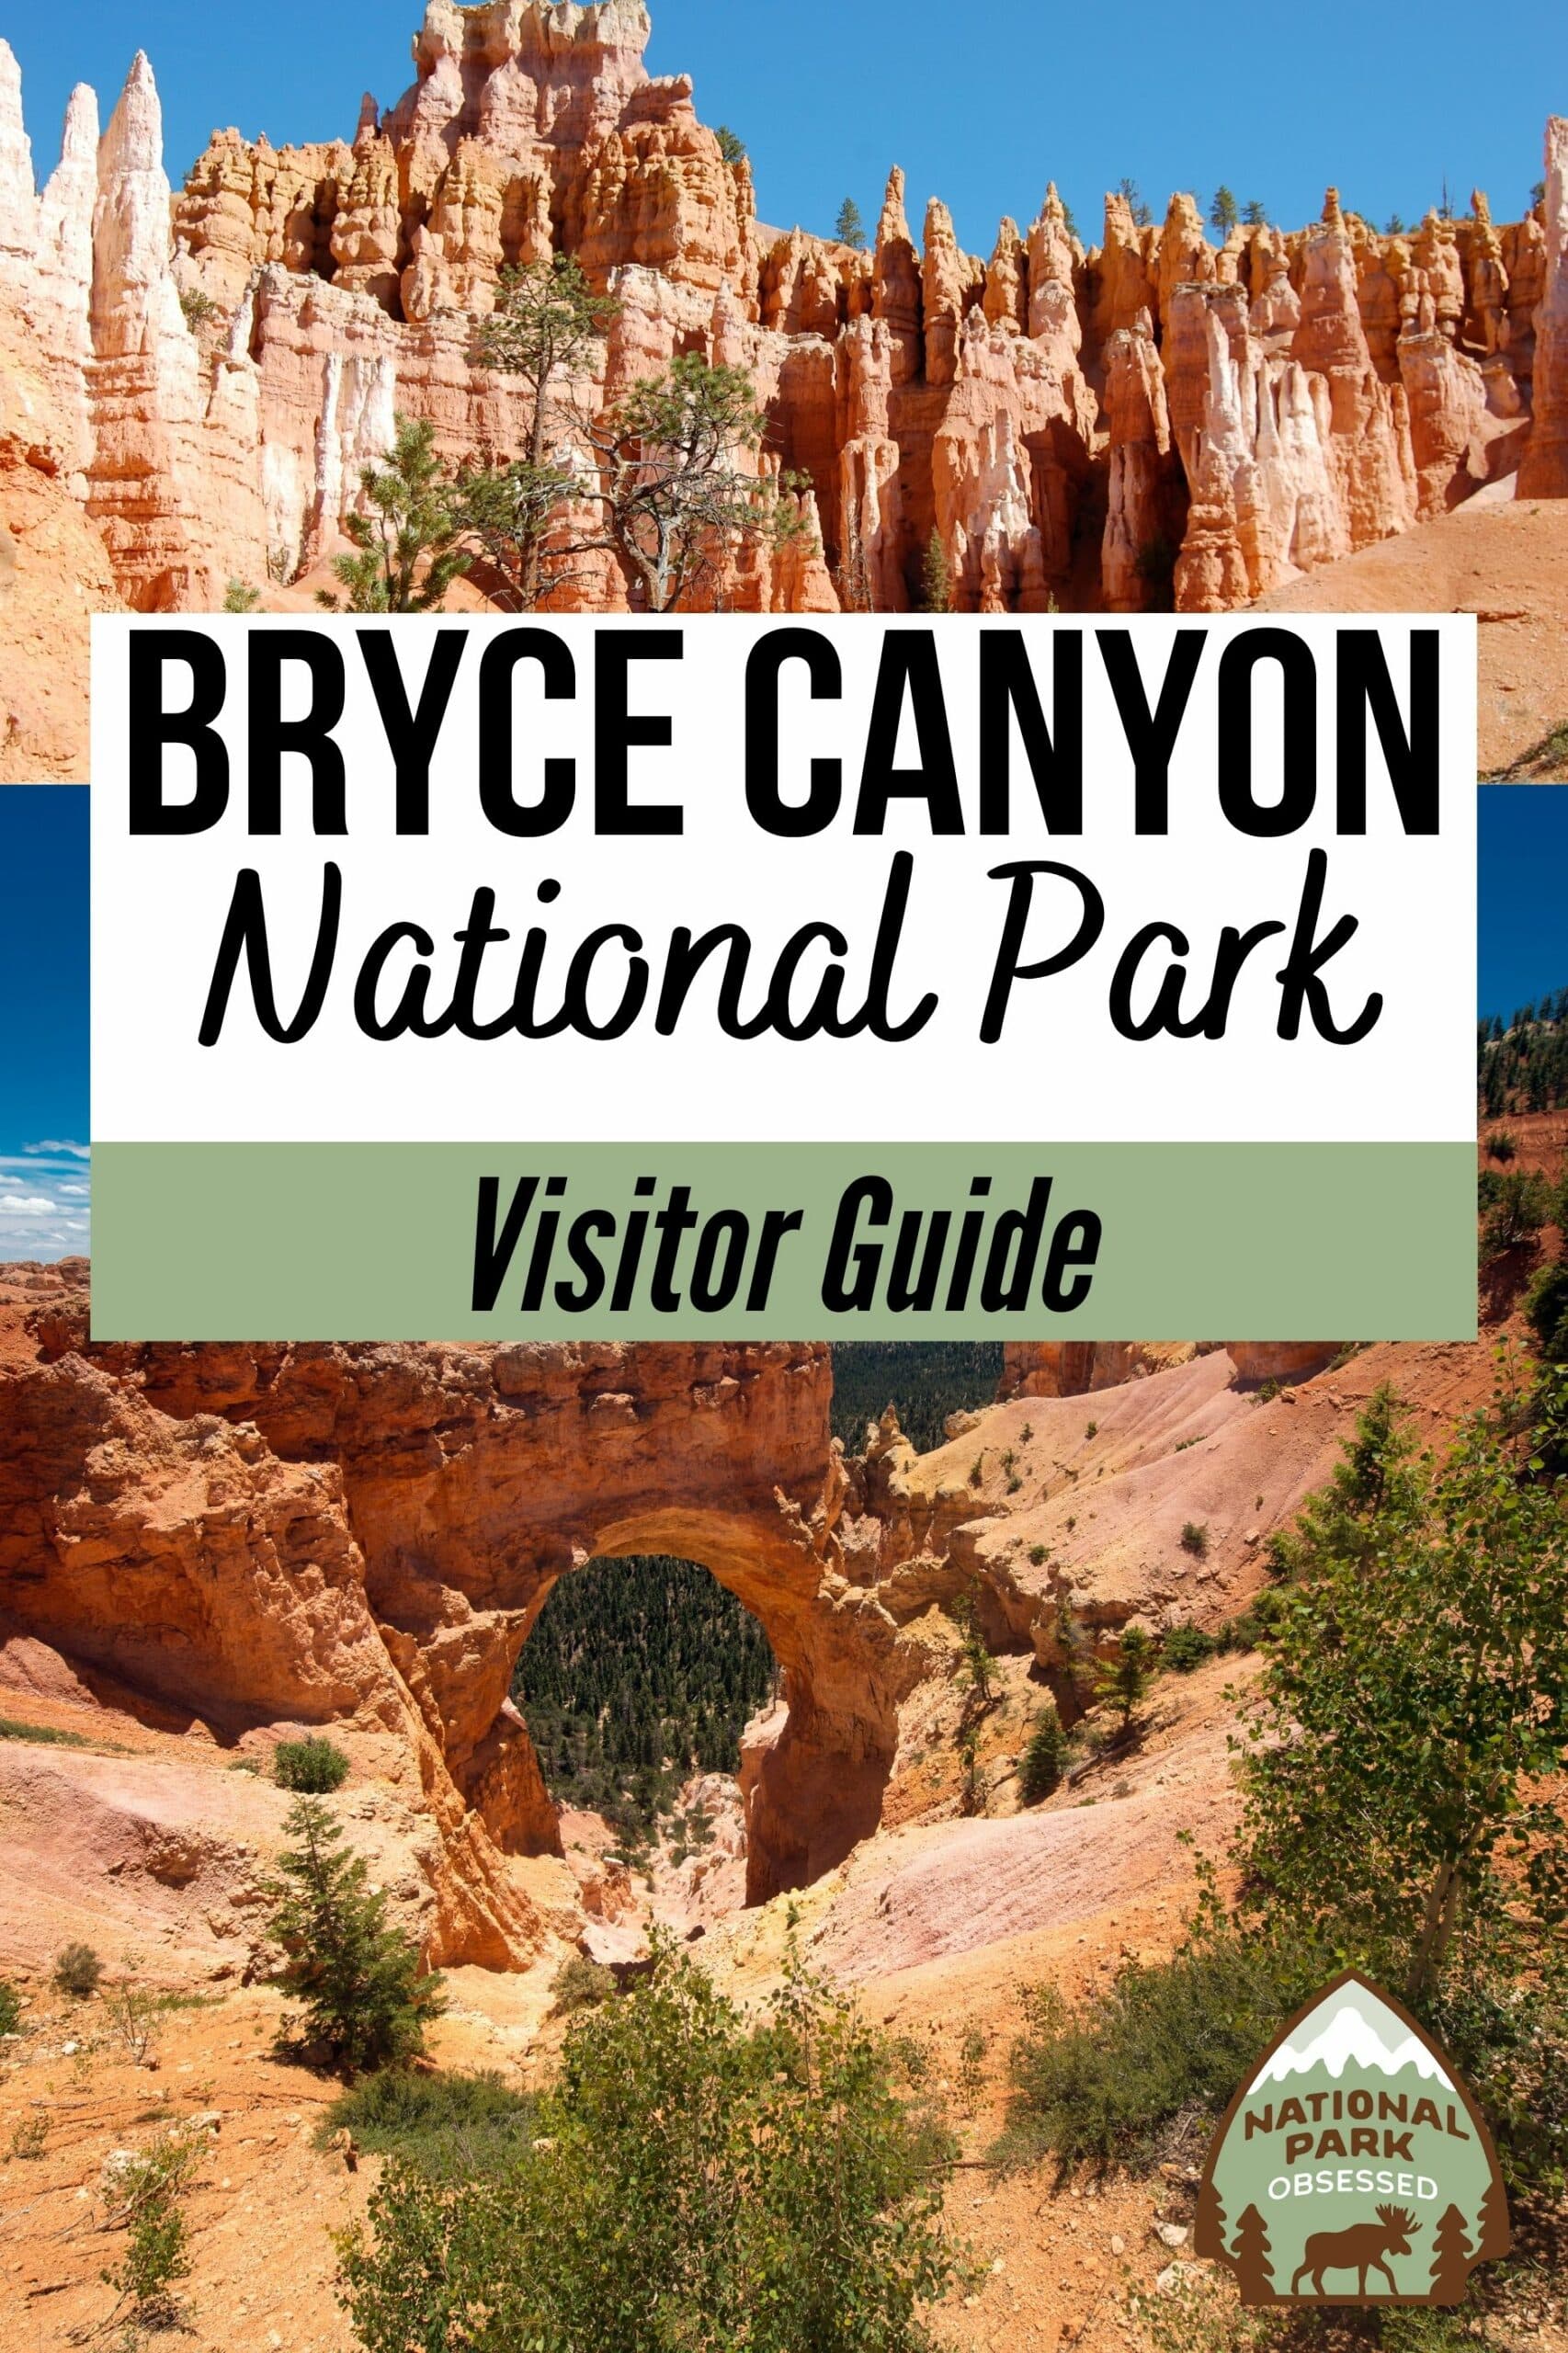 Are you planning a trip to Bryce Canyon National Park? Click here for the complete guide to visiting Bryce Canyon National Park written by a National Park Expert